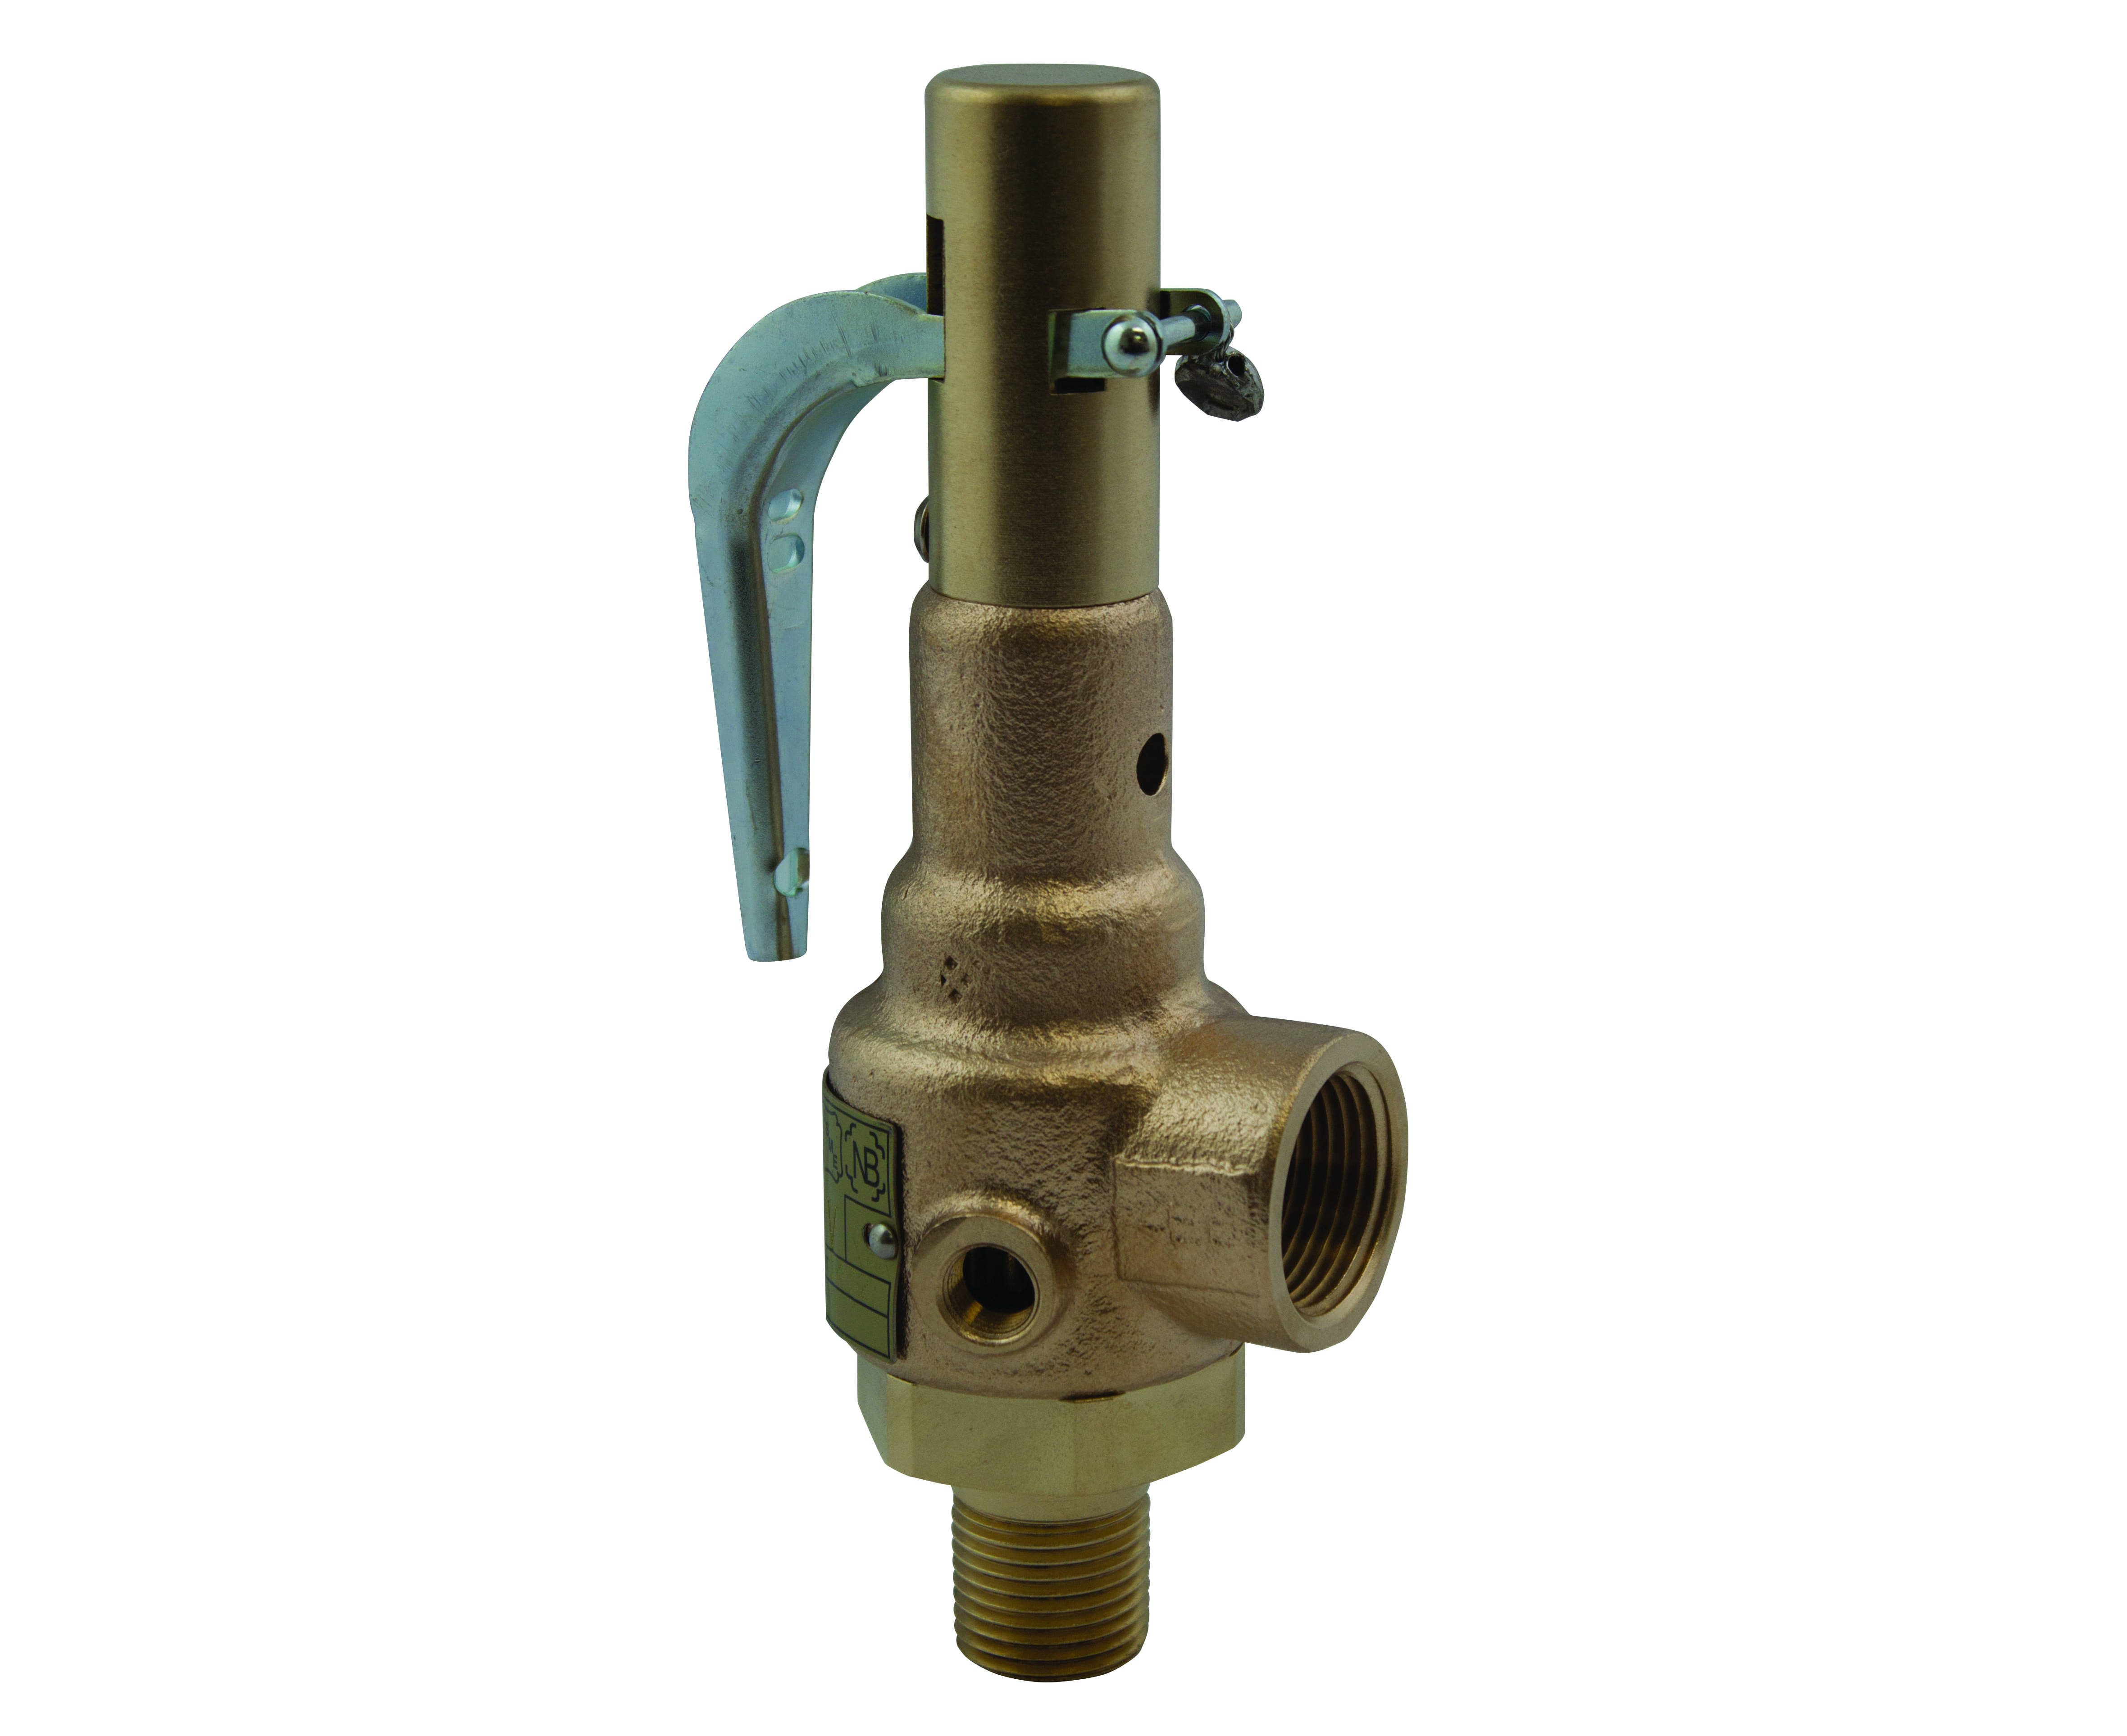 Preview image for Apollo ASME Sec I Steam Bronze Safety Relief Valves with Brass Trim, Teflon Seat, Performance Test Reports Included, 1" x 1-1/4" (MNPT x FNPT)